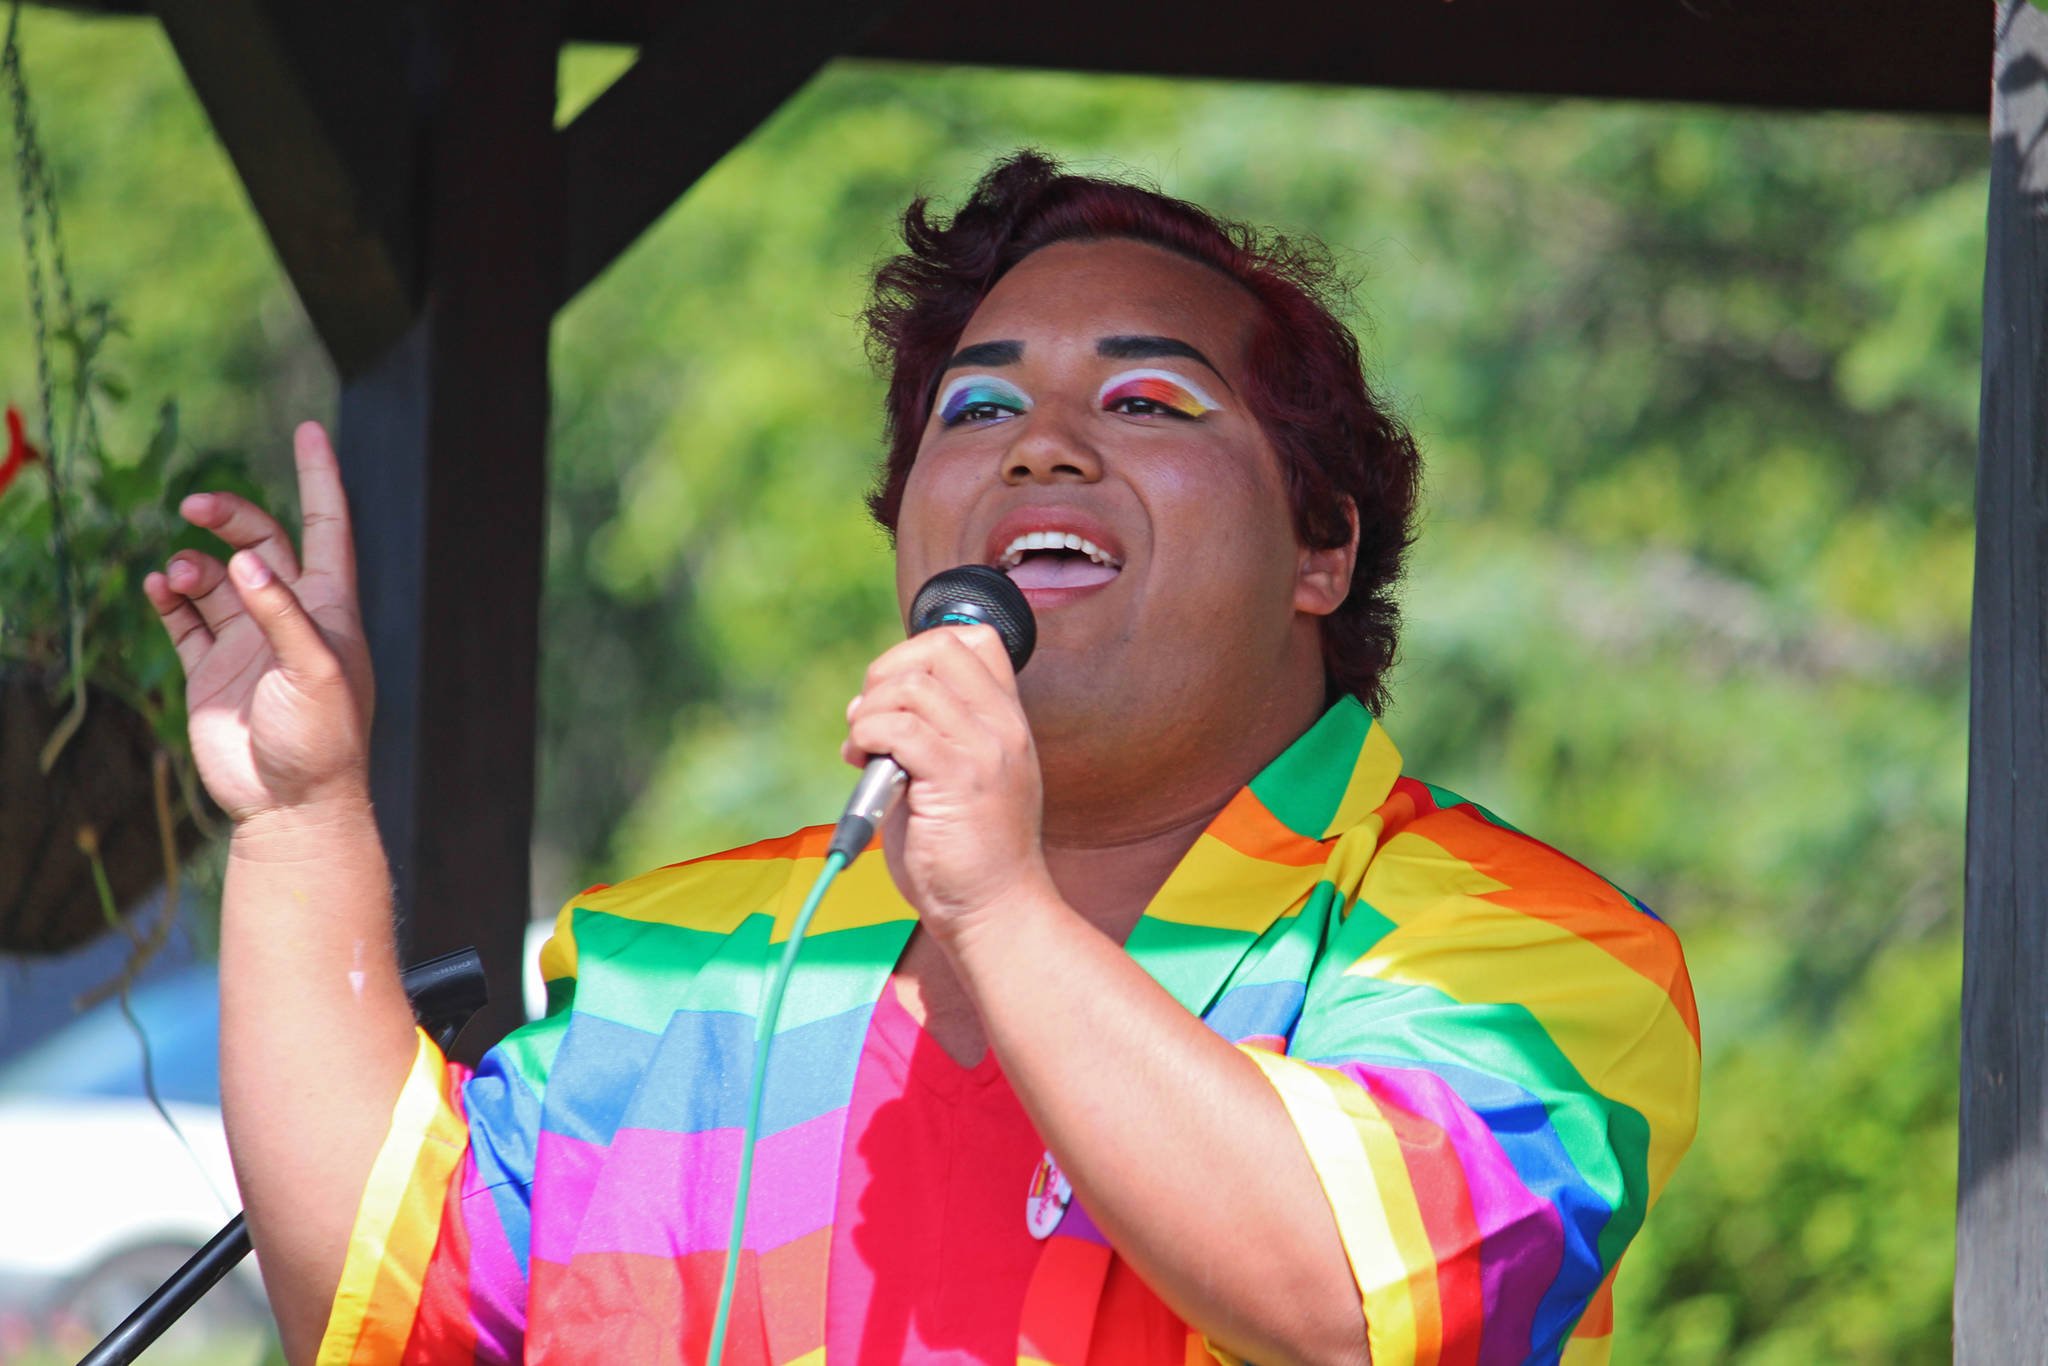 Homer High School graduate Falcom Greear performs a song ahead of this year’s Pride Walk on Saturday, June 22, 2019 at WKFL Park in Homer, Alaska. (Photo by Megan Pacer/Homer News)